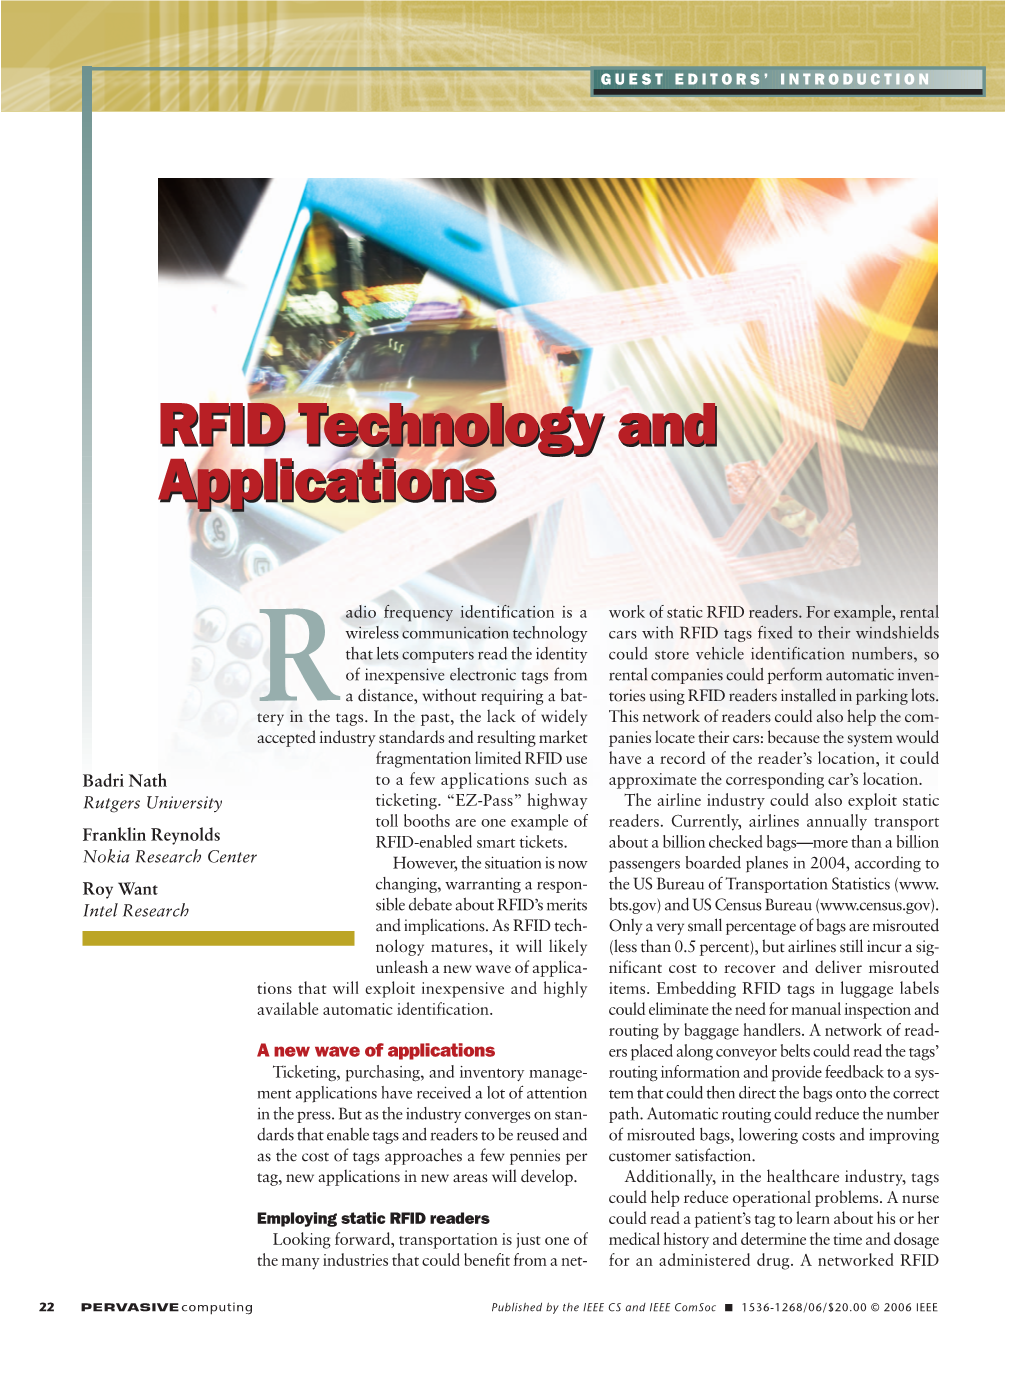 RFID Technology and Applications RFID Technology and Applications